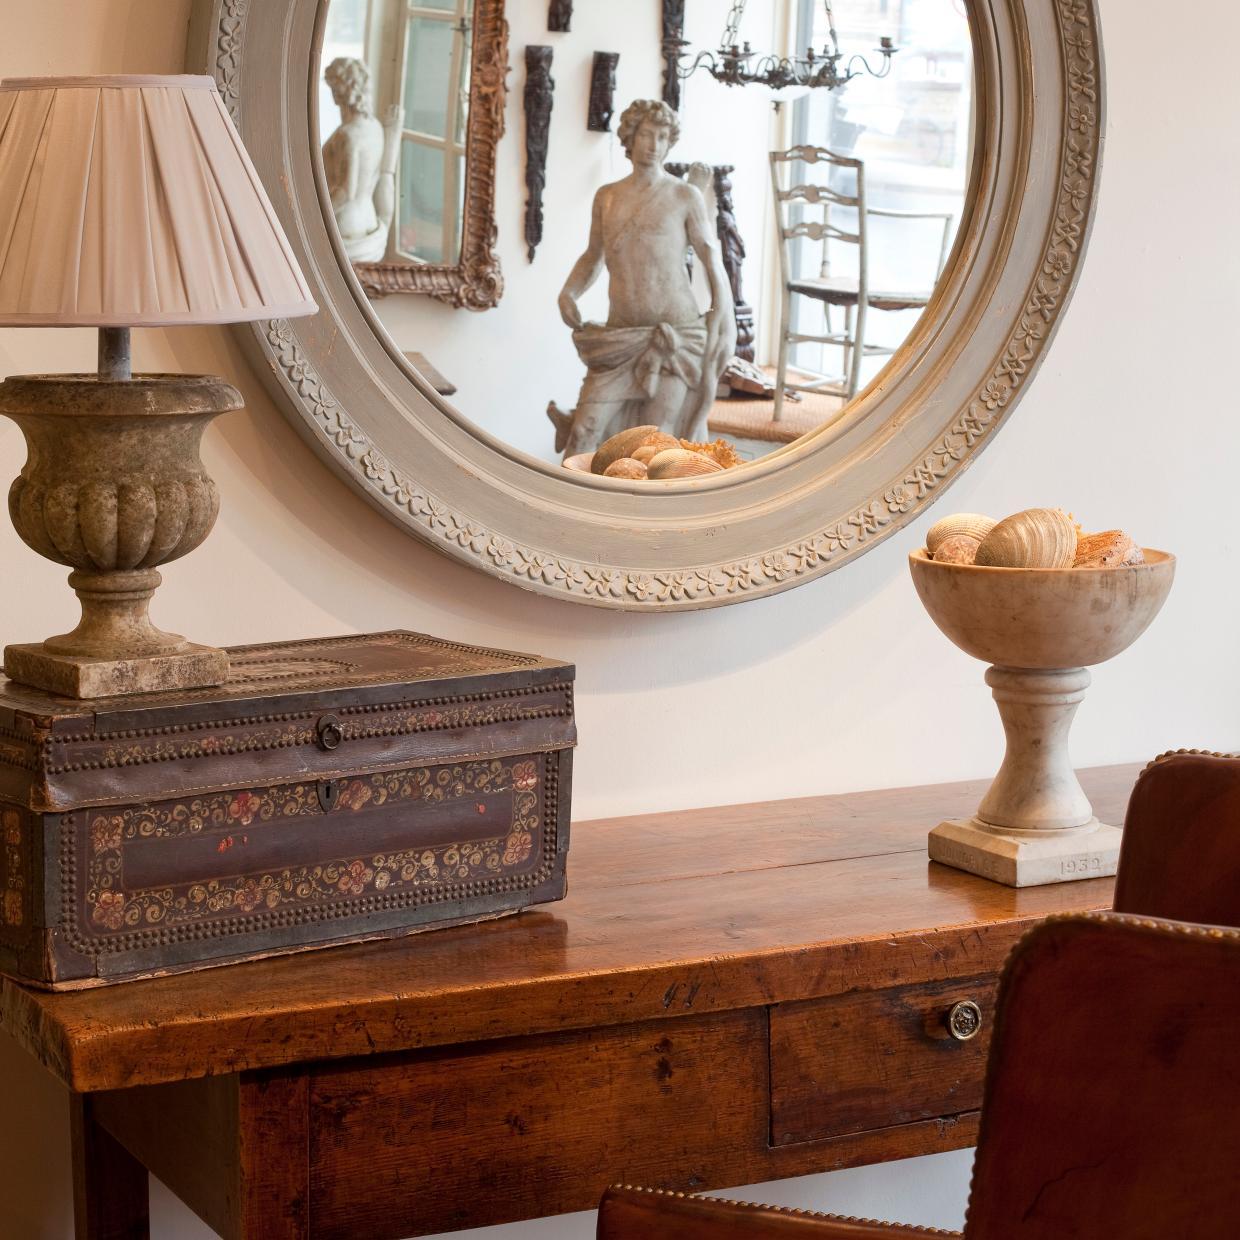 Specialising in a mix of period and decorative antiques, seating, as well as garden and architectural pieces.